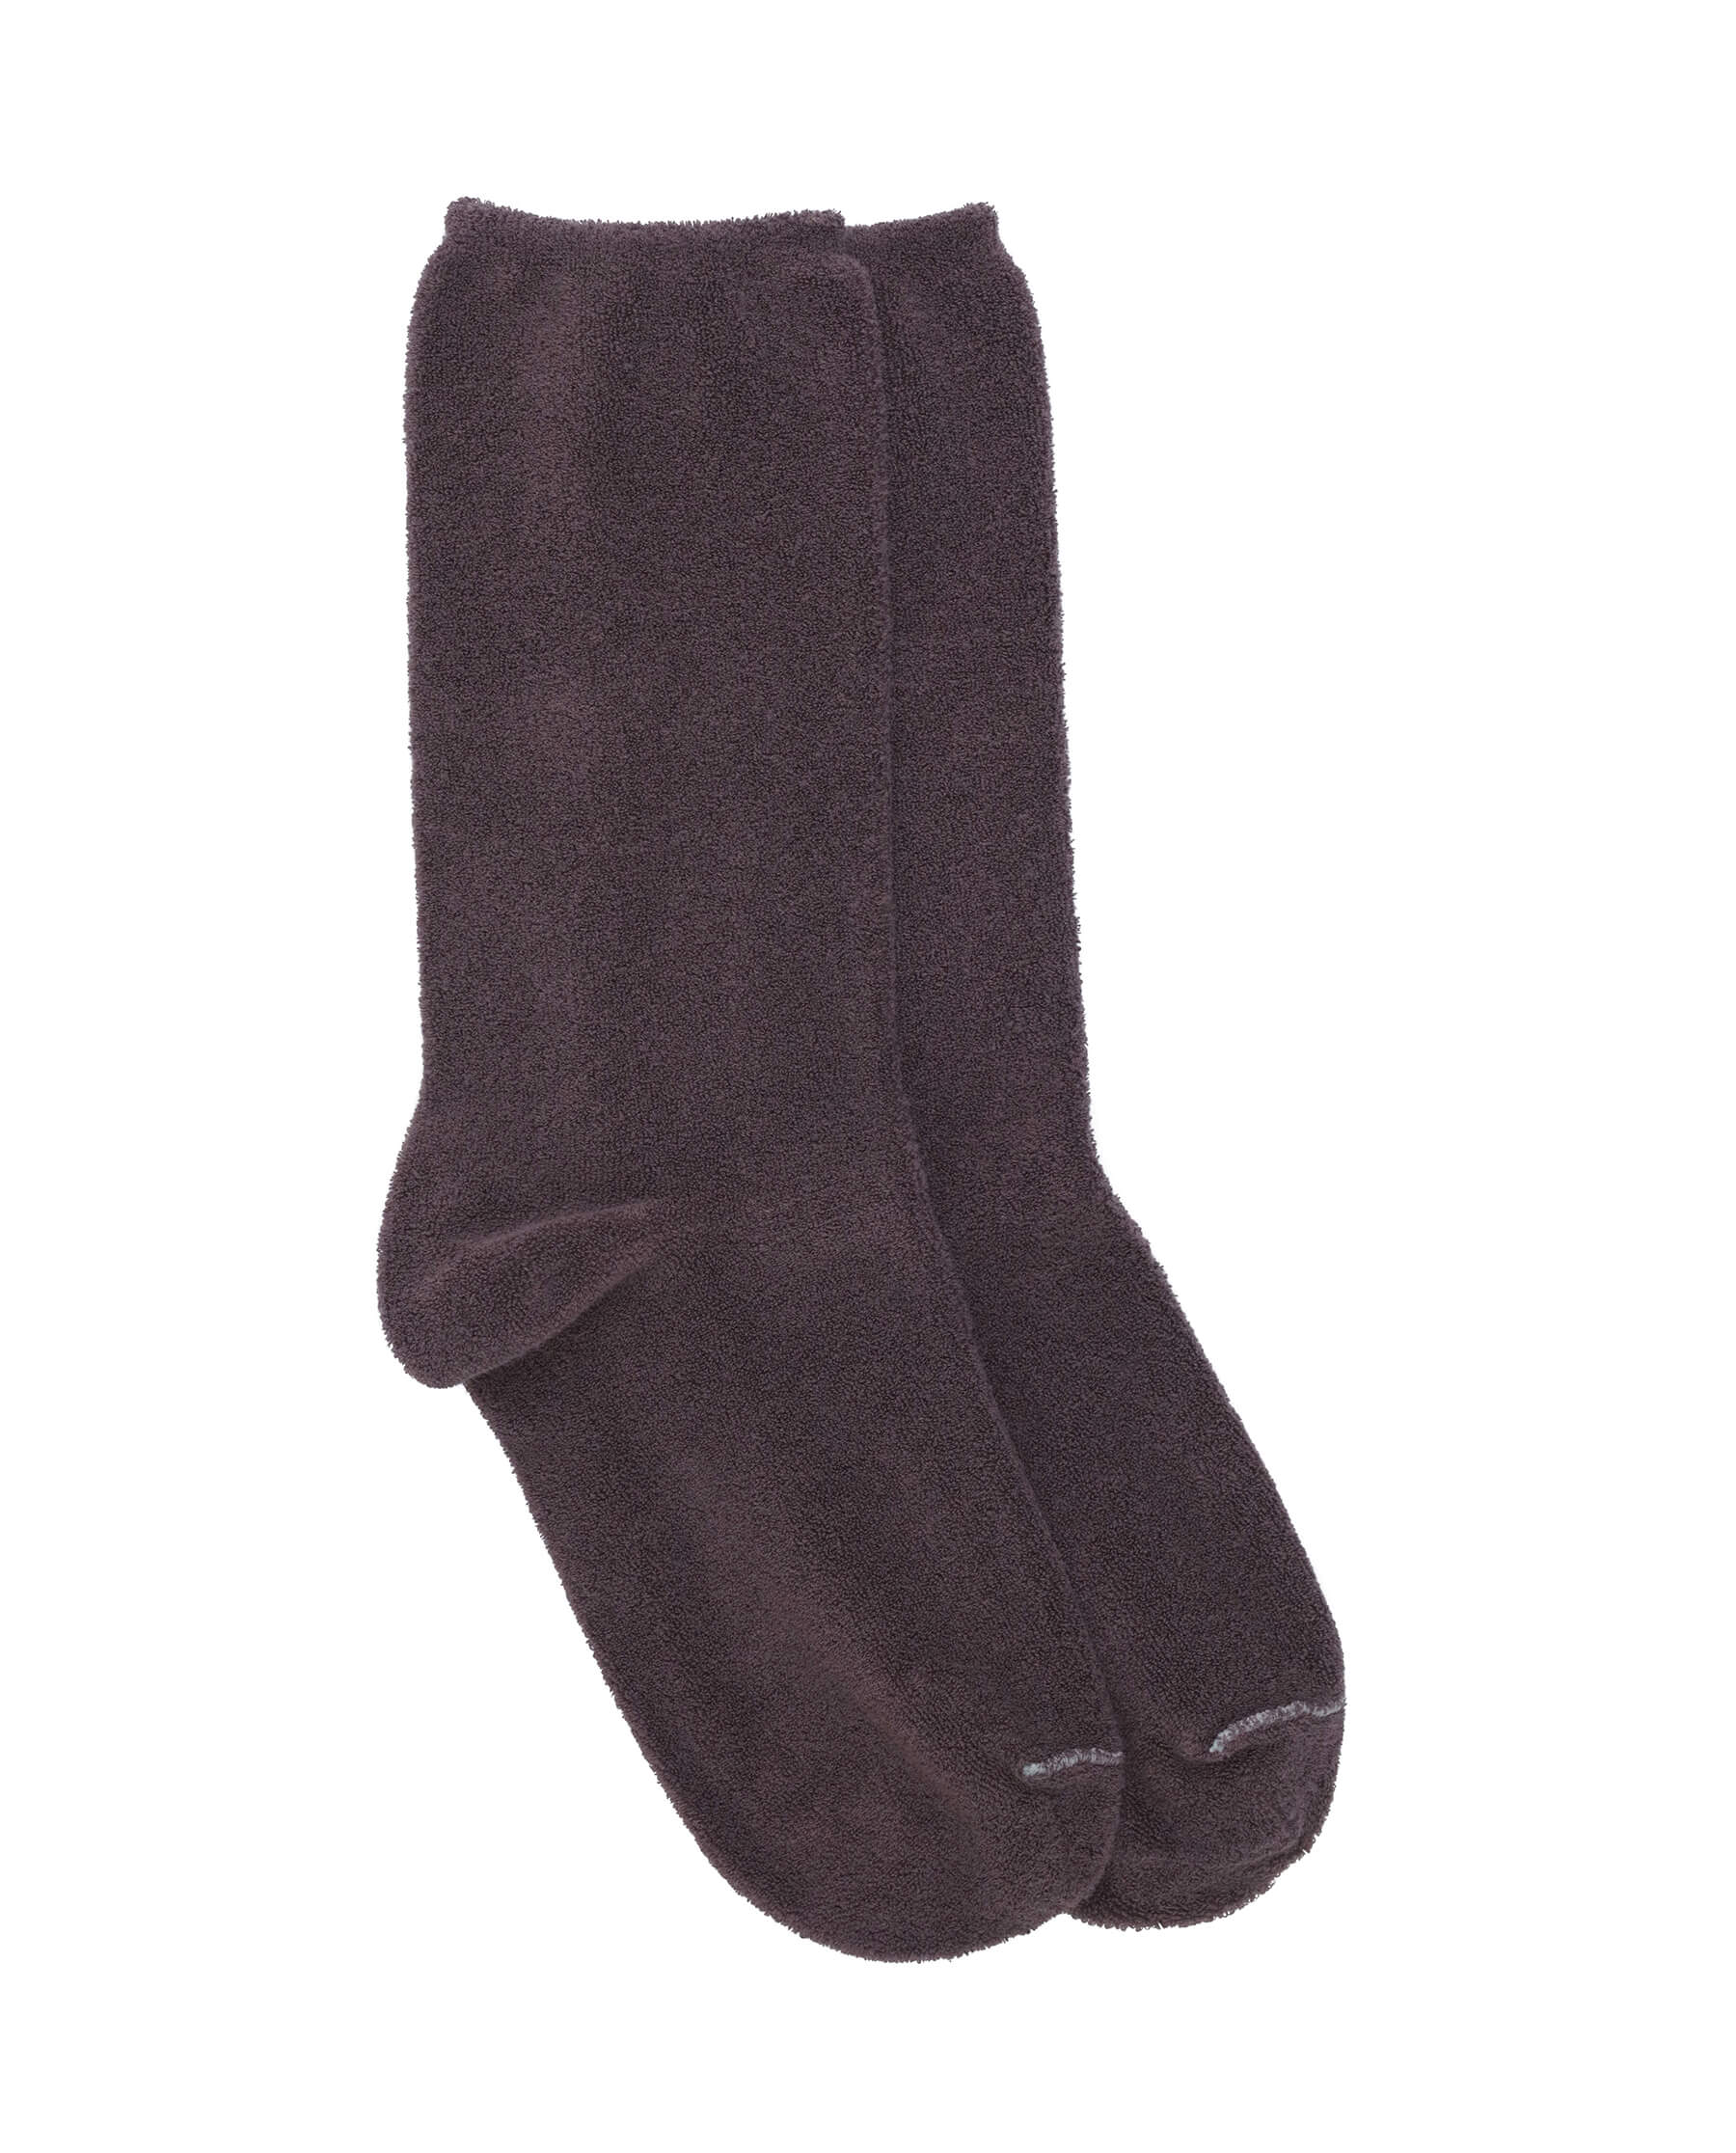 The Microterry Sock. -- Vintage Mulberry SOCKS THE GREAT. SU23 MICROTERRY